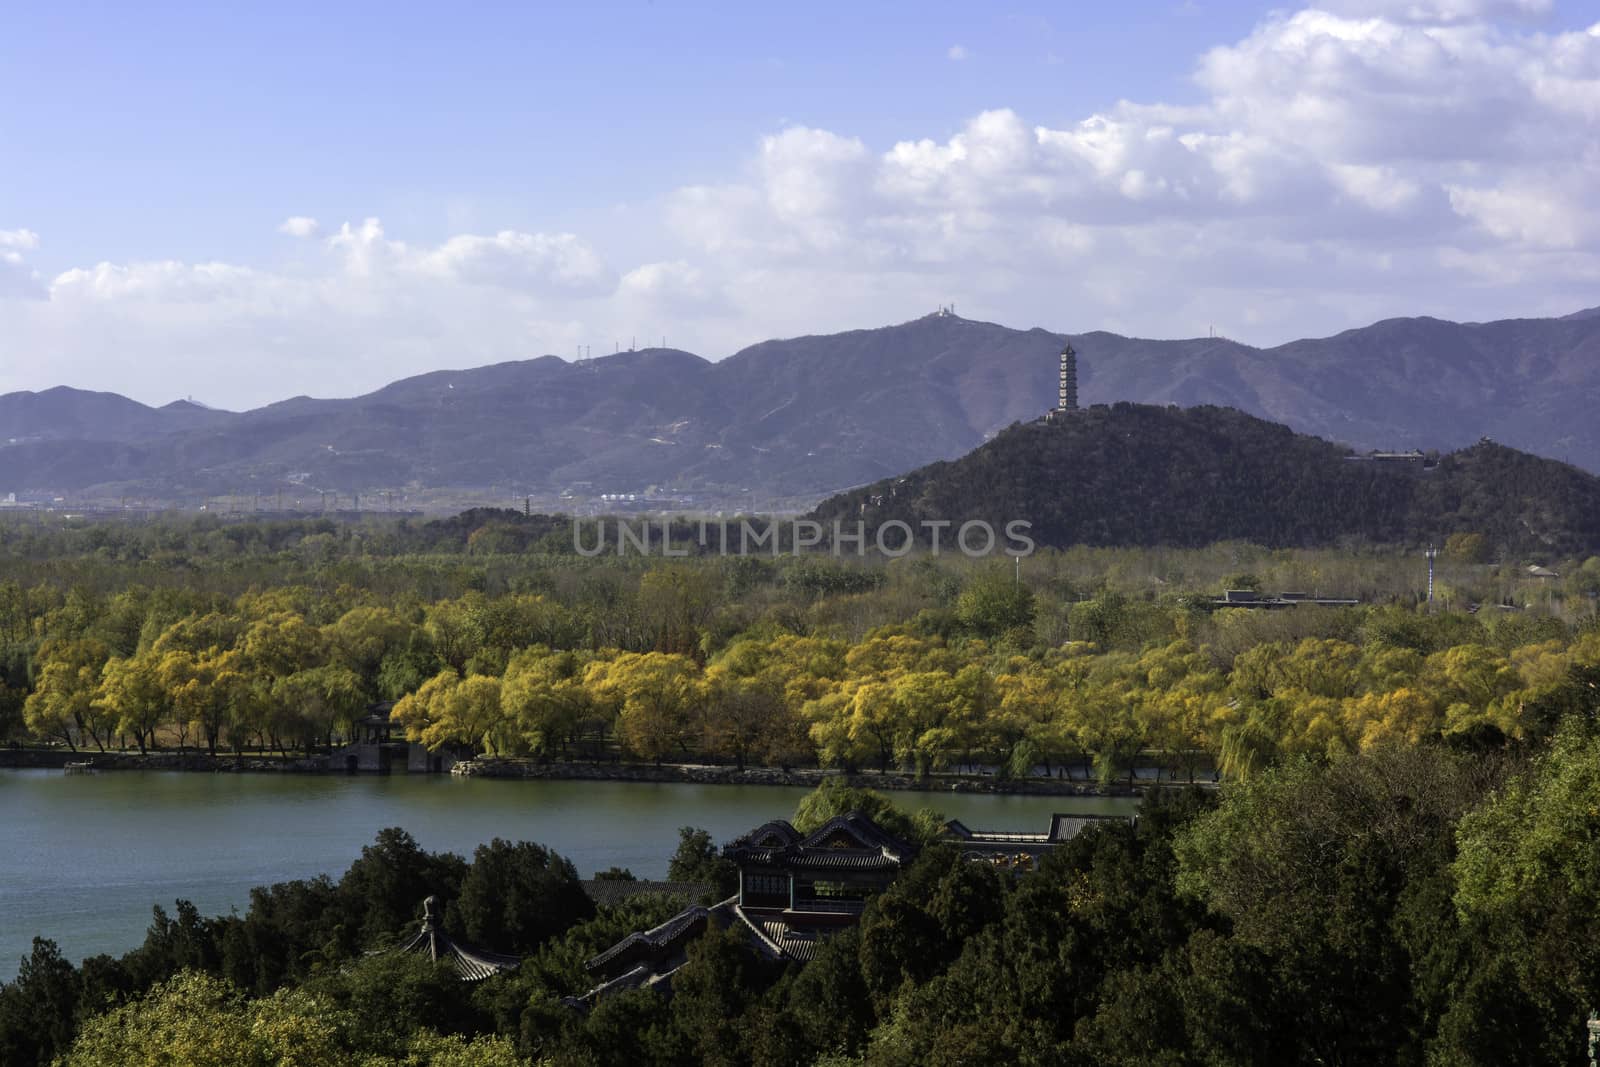 The Yuquan Hill of Summer Palace in Beijing, China.